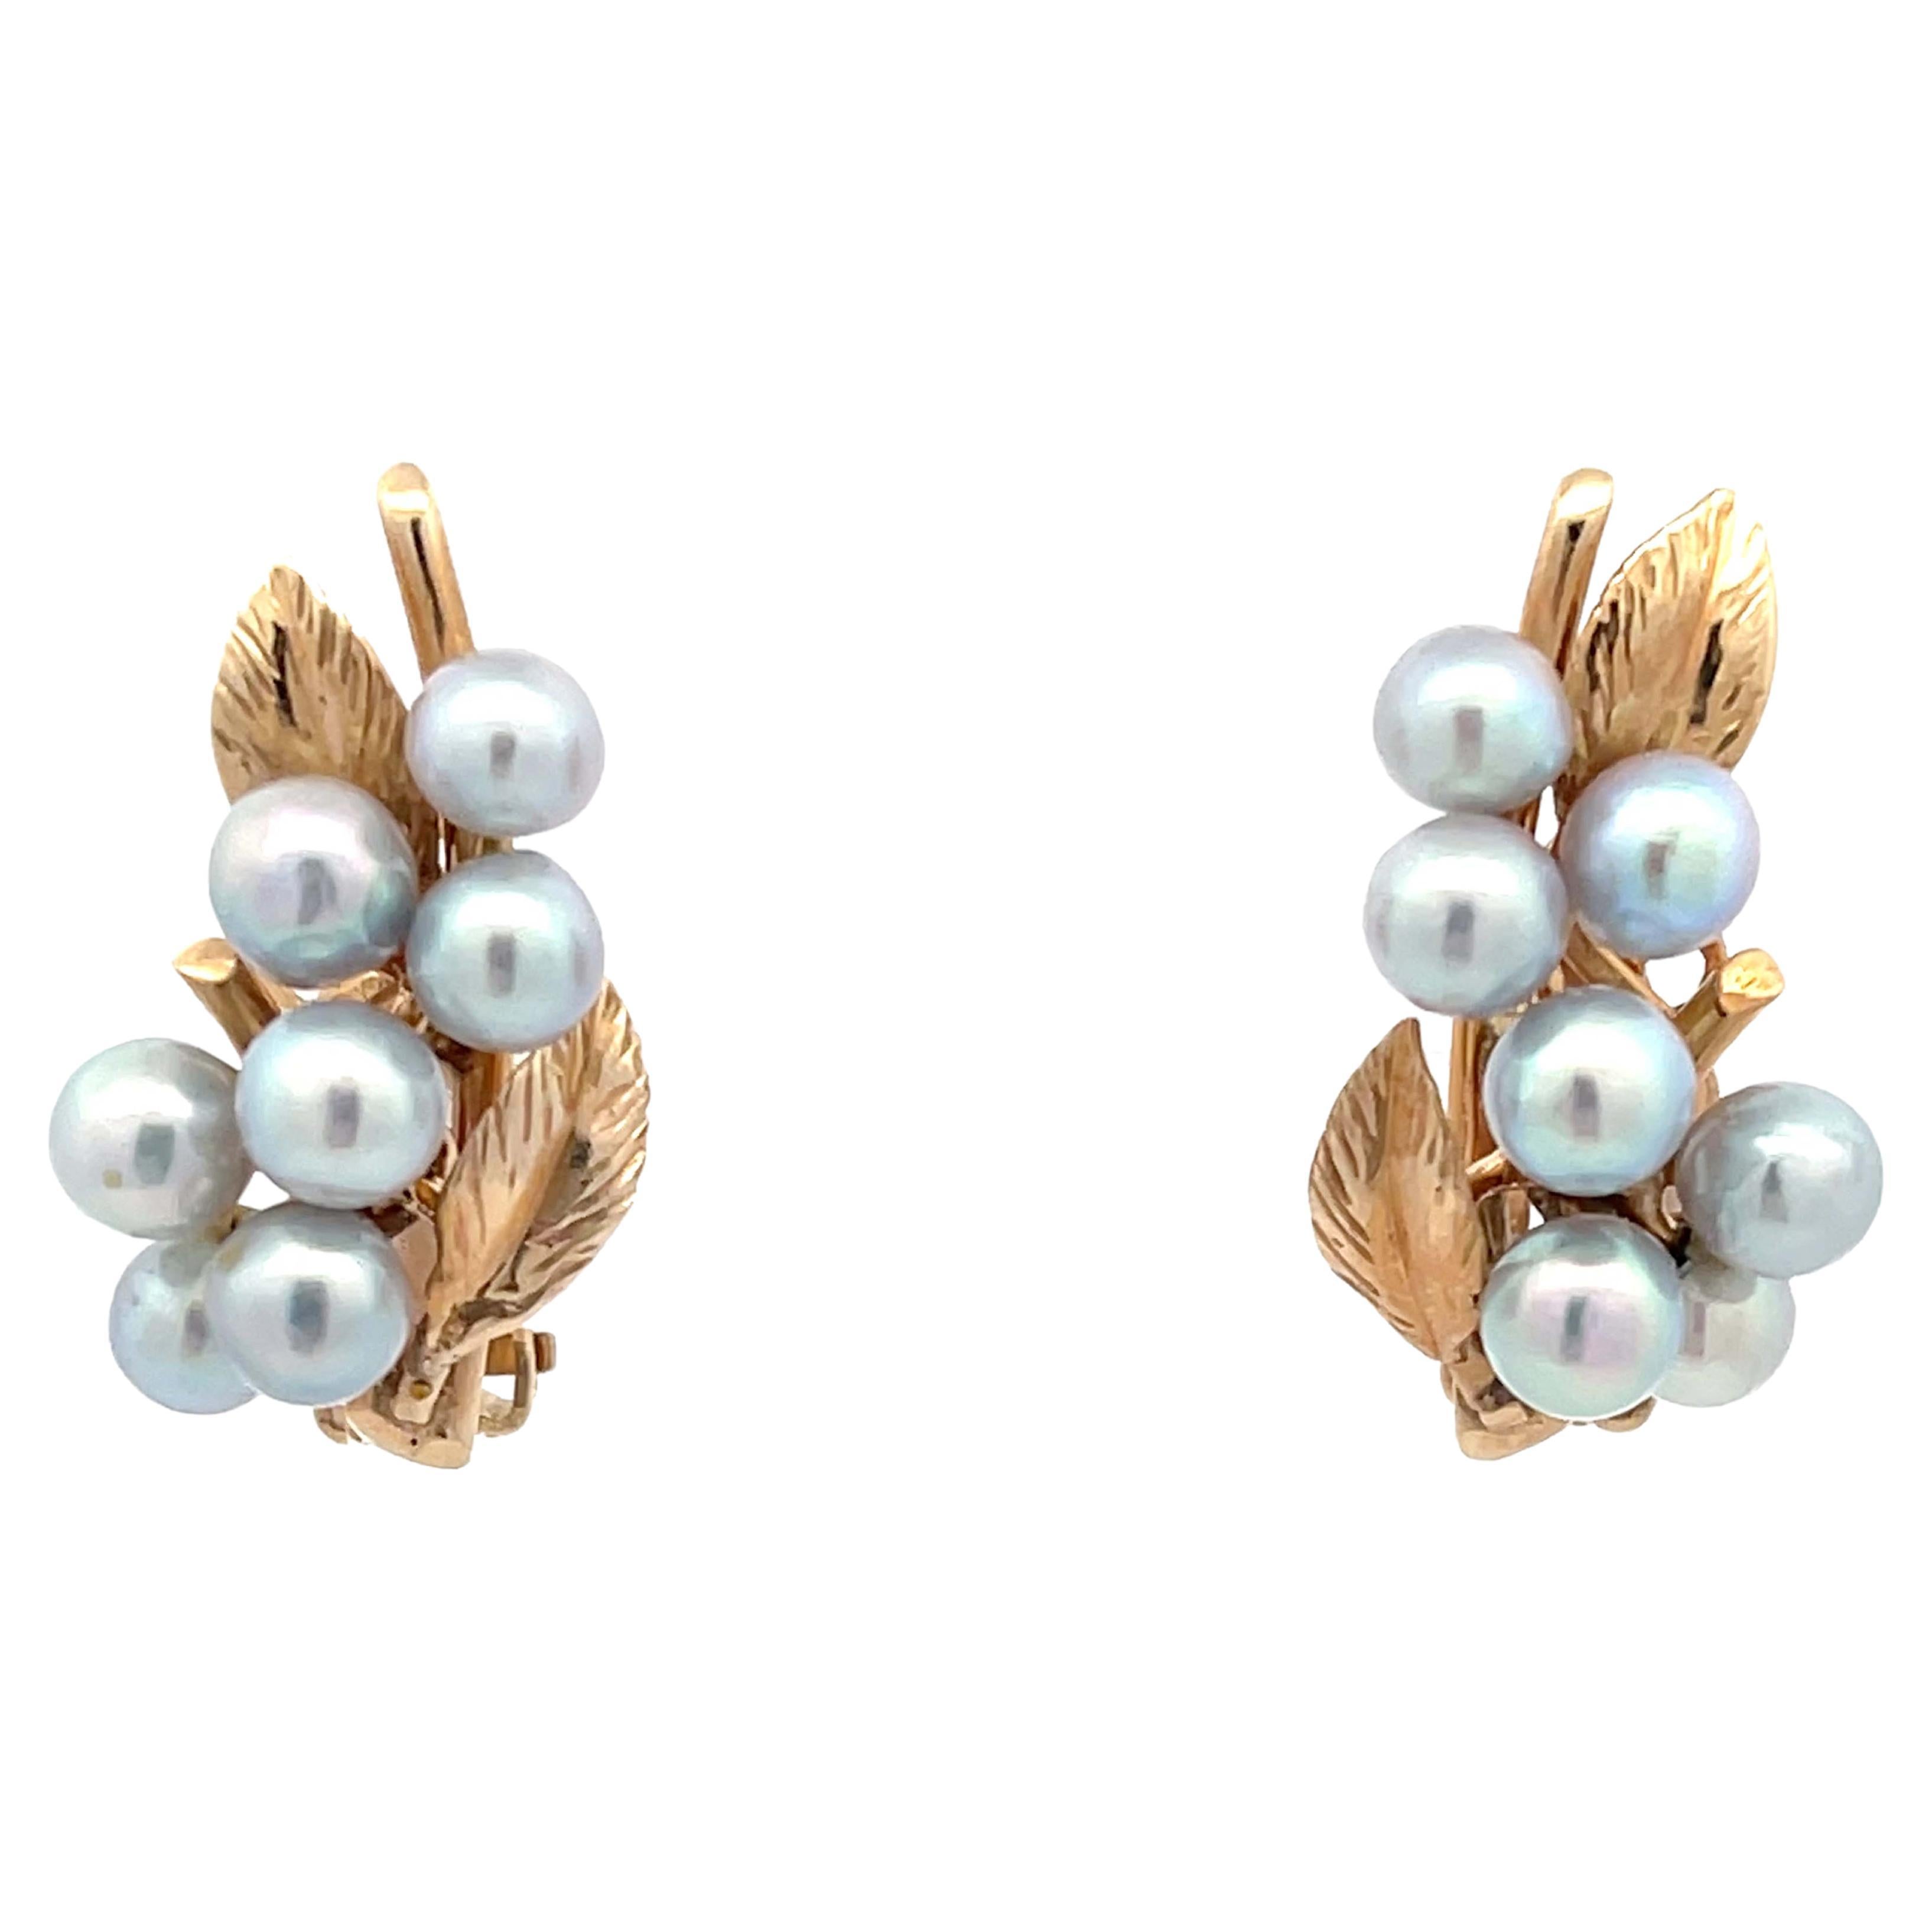 Mings Baroque Pearl and Leaf Clip on Earrings in 14k Yellow Gold